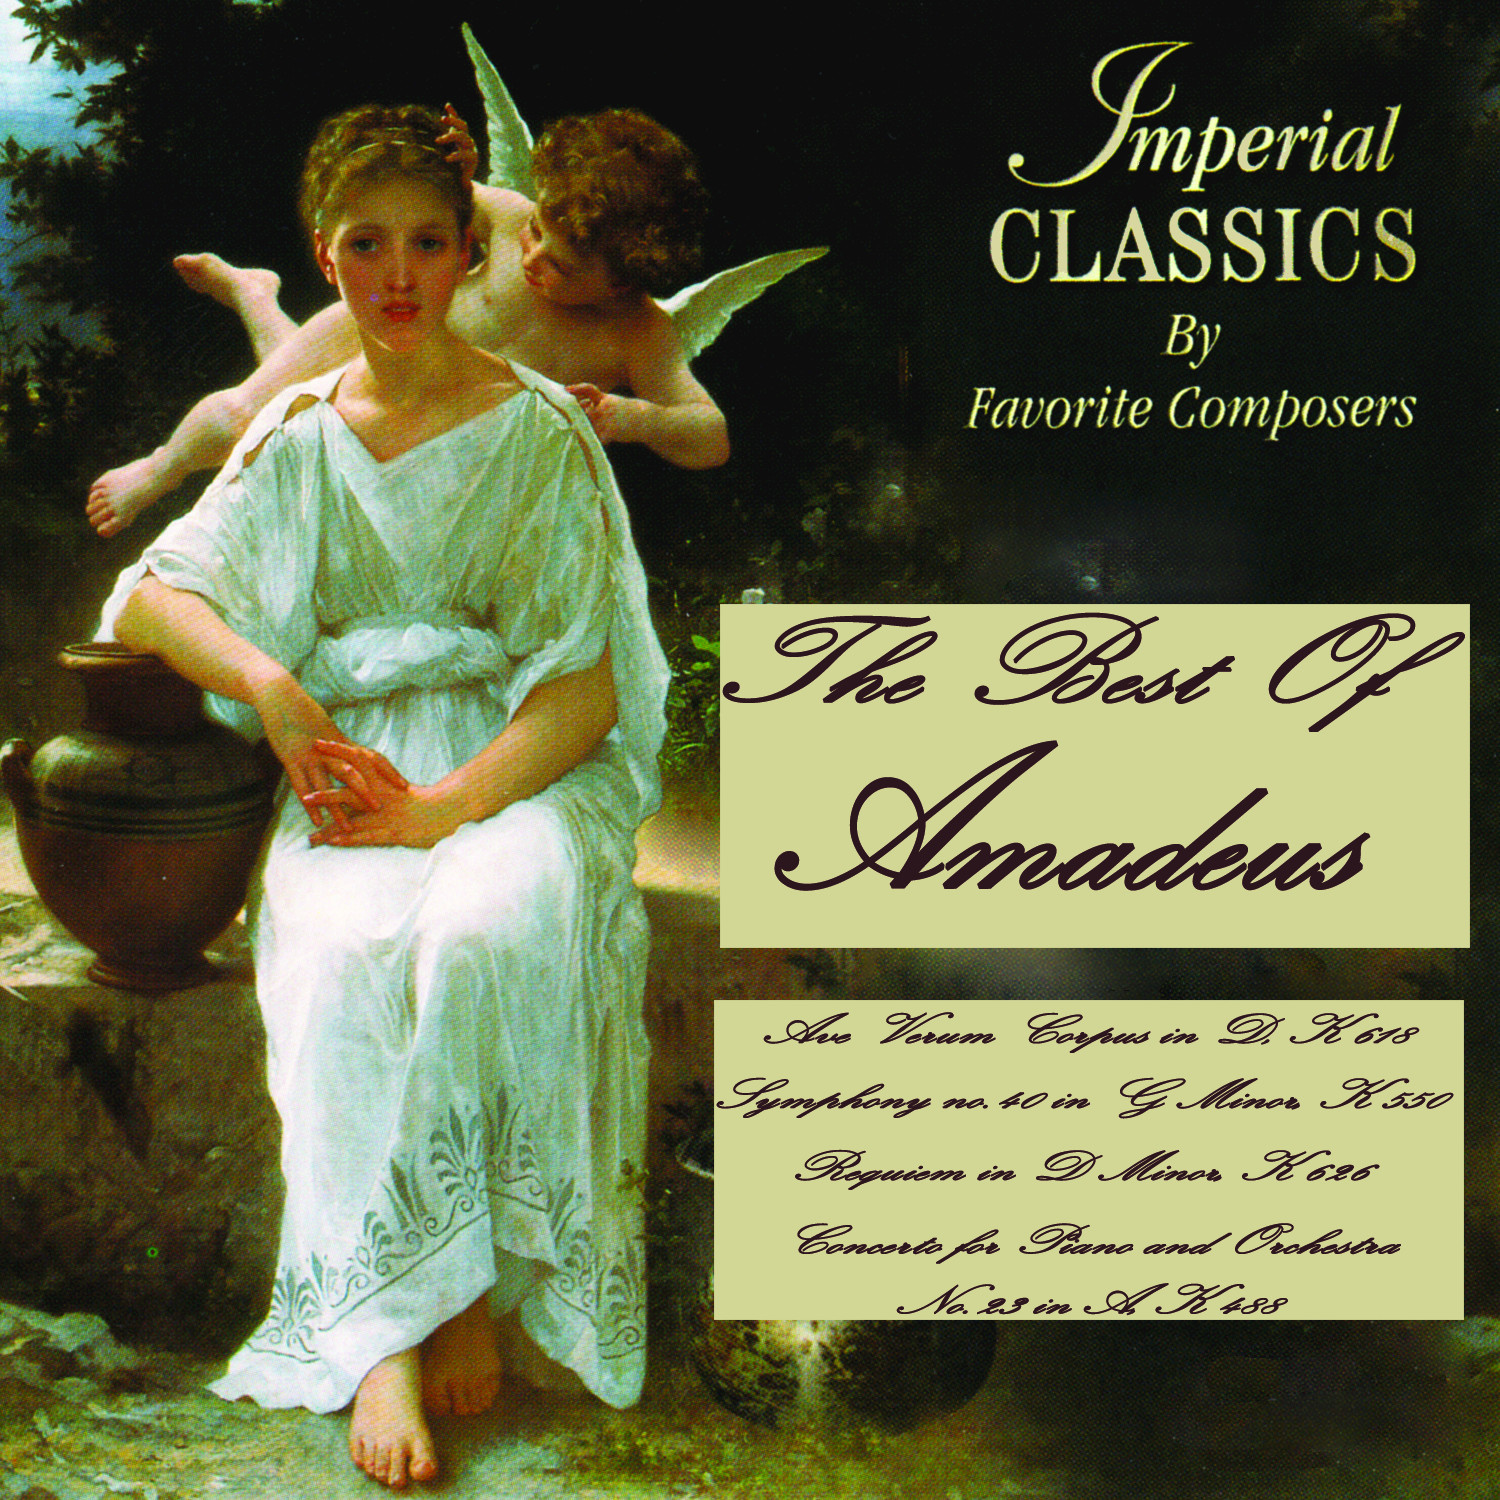 Mozart: Concerto for Piano and Orchestra No. 9 in E flat Major, K 271 "Jeunehomme": Allegro